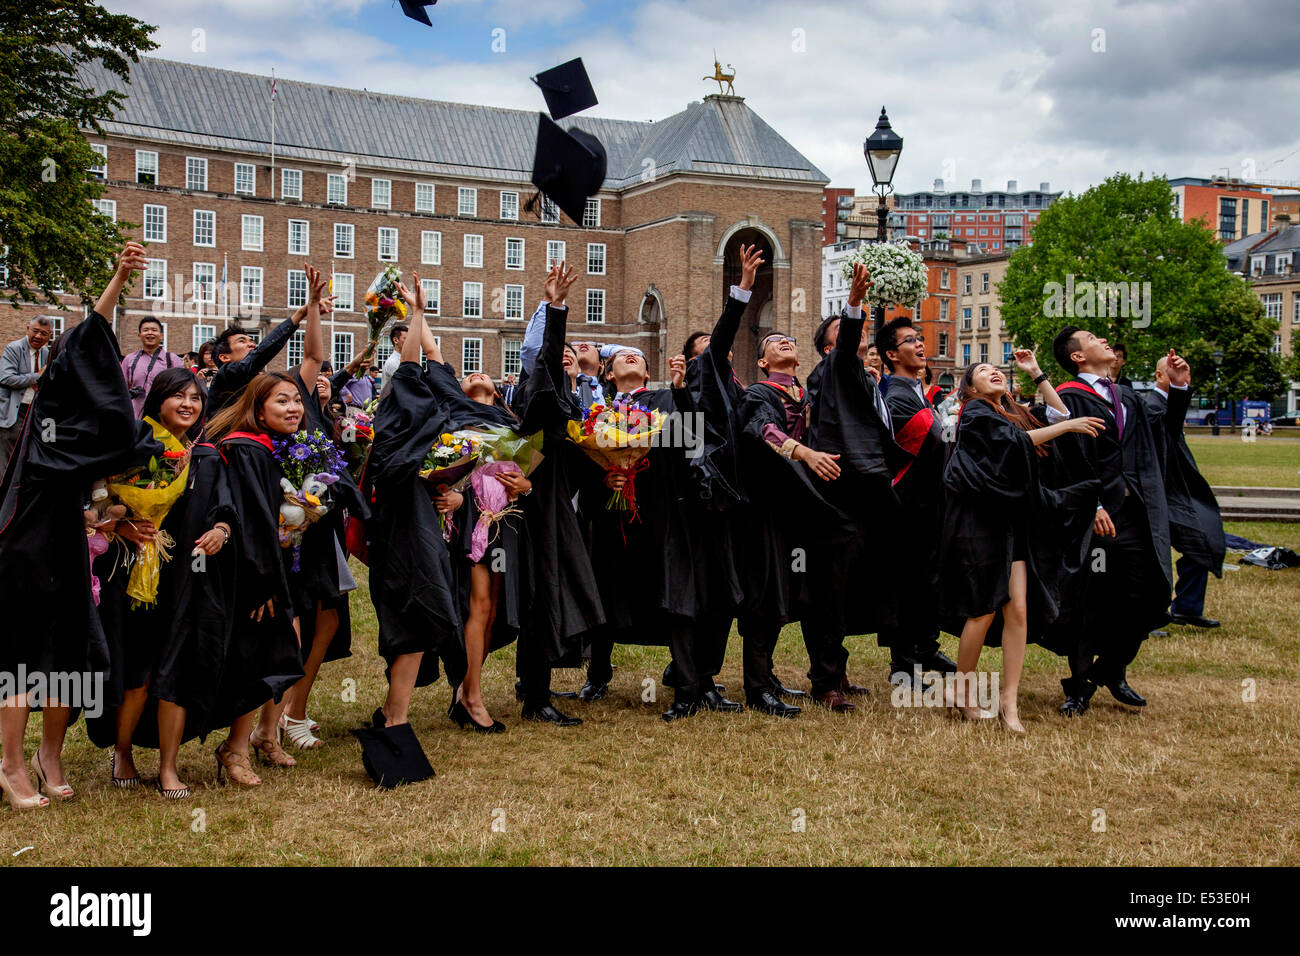 Graduating Students At The University of Western England Throw Their Hats In The Air At Their Degree Ceremony, Bristol, England Stock Photo